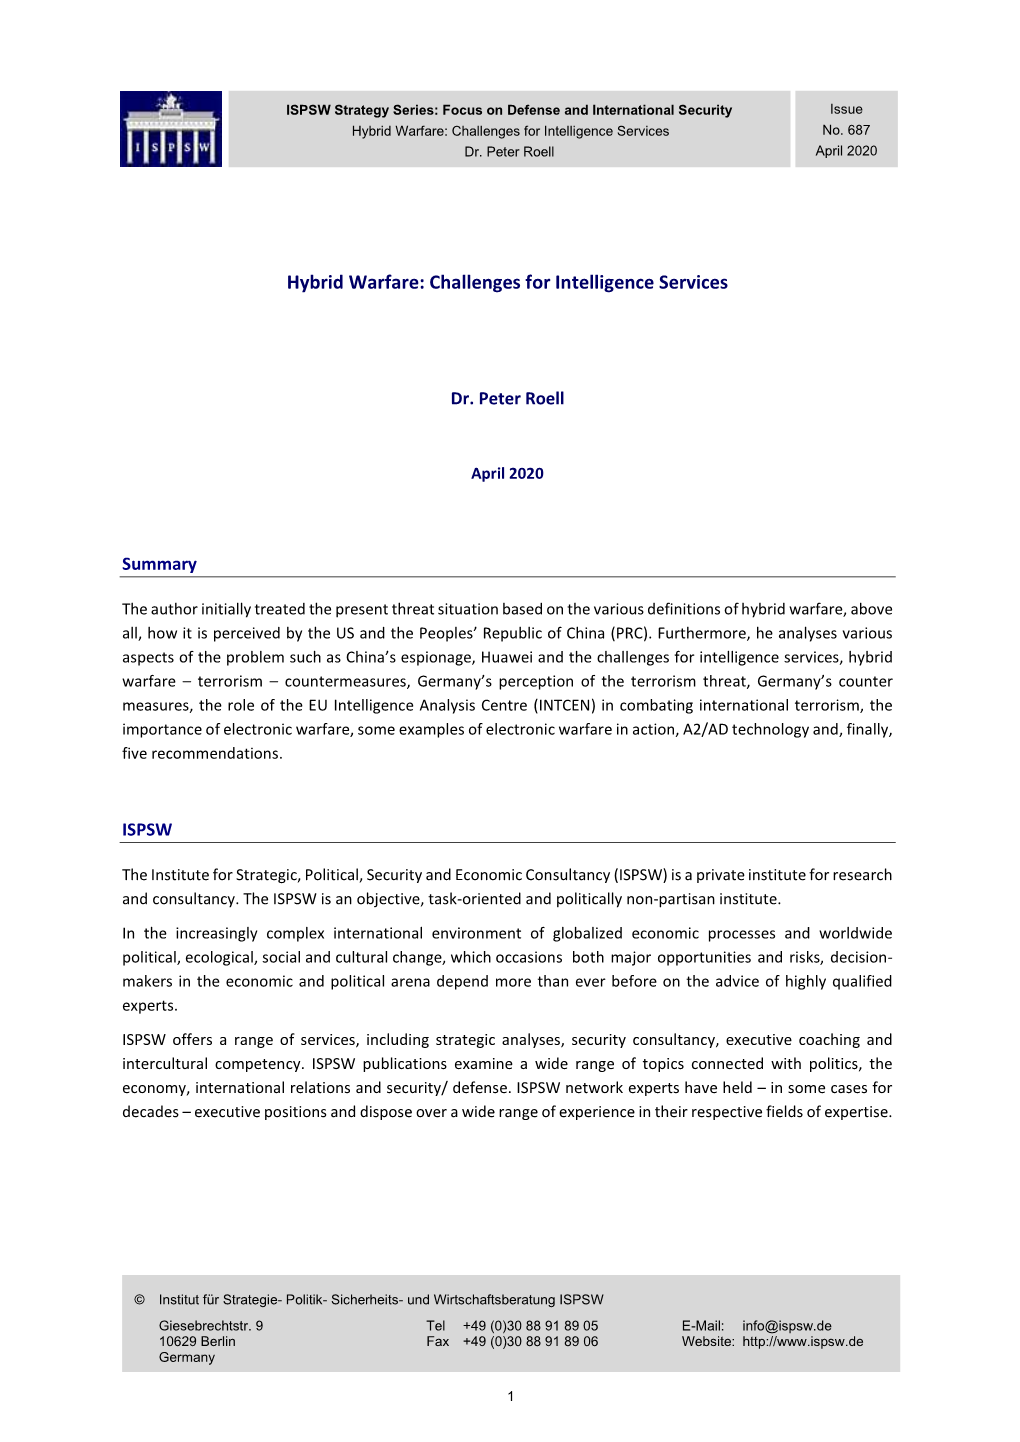 Hybrid Warfare: Challenges for Intelligence Services No